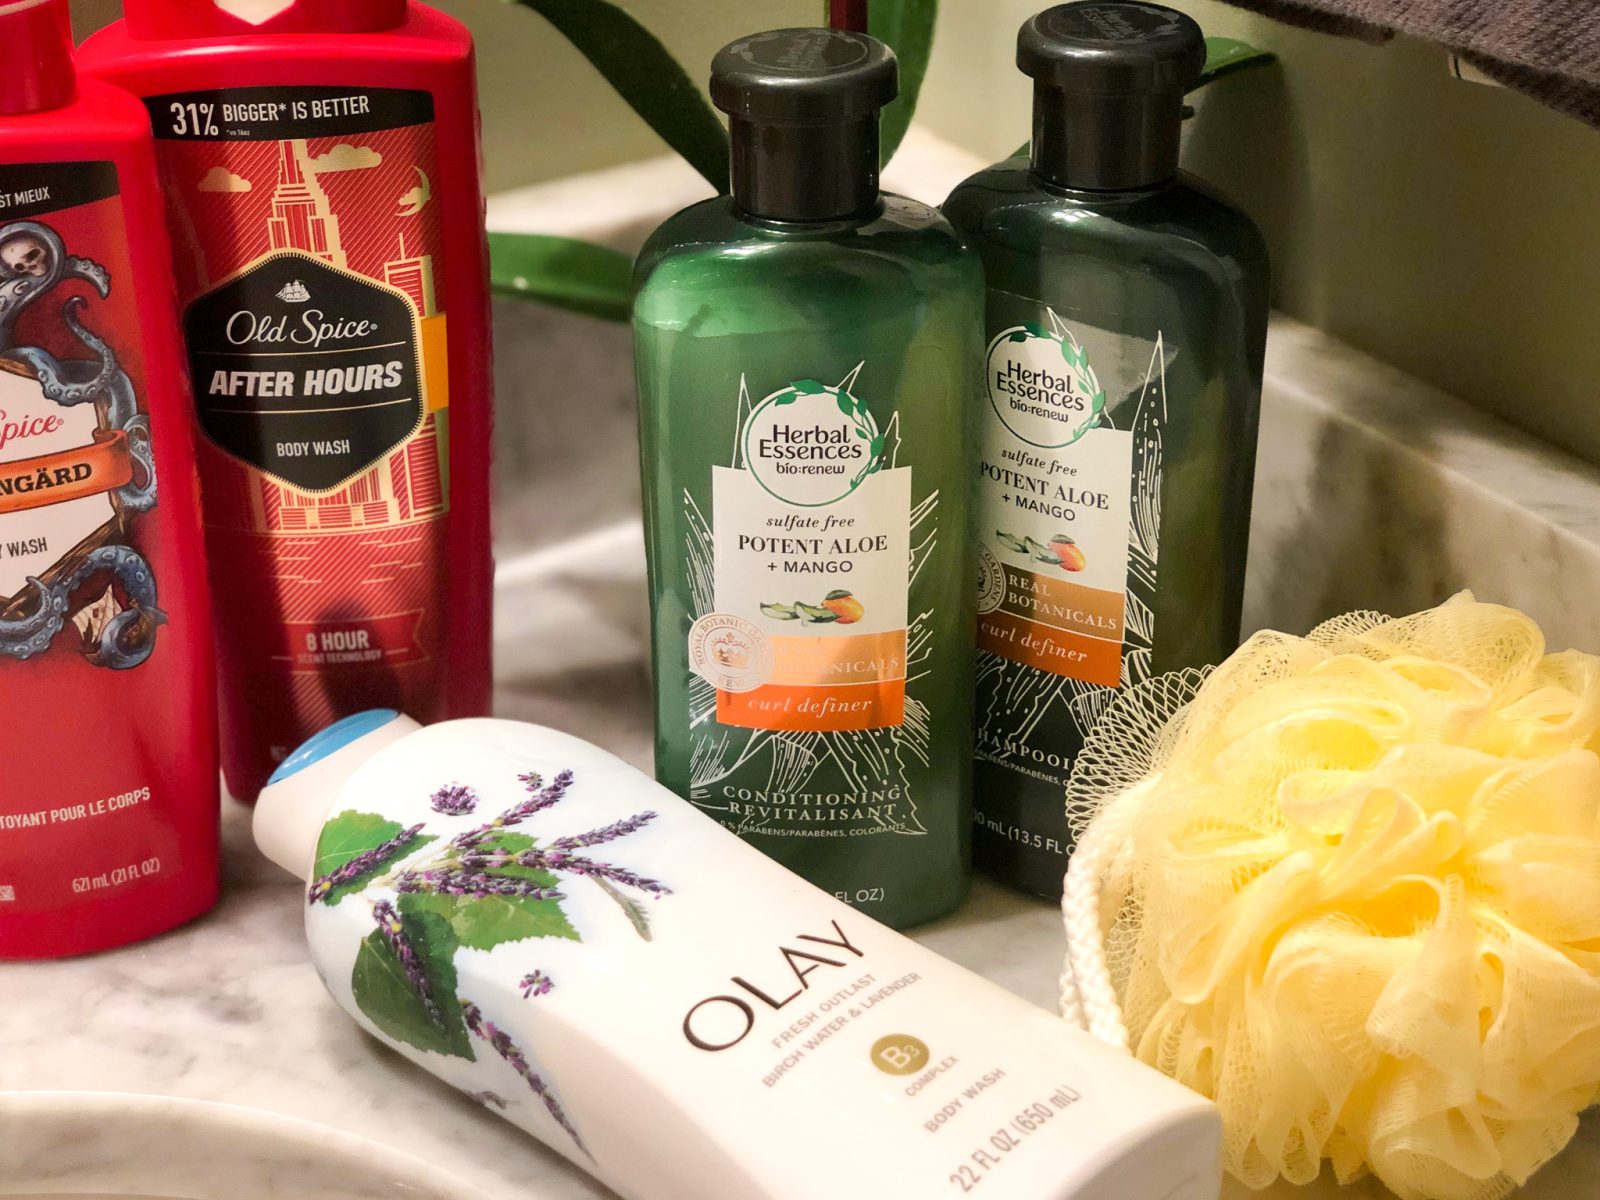 Buy $15 Worth of Participating P&G Products And Get A $5 Publix Gift Card Instantly!